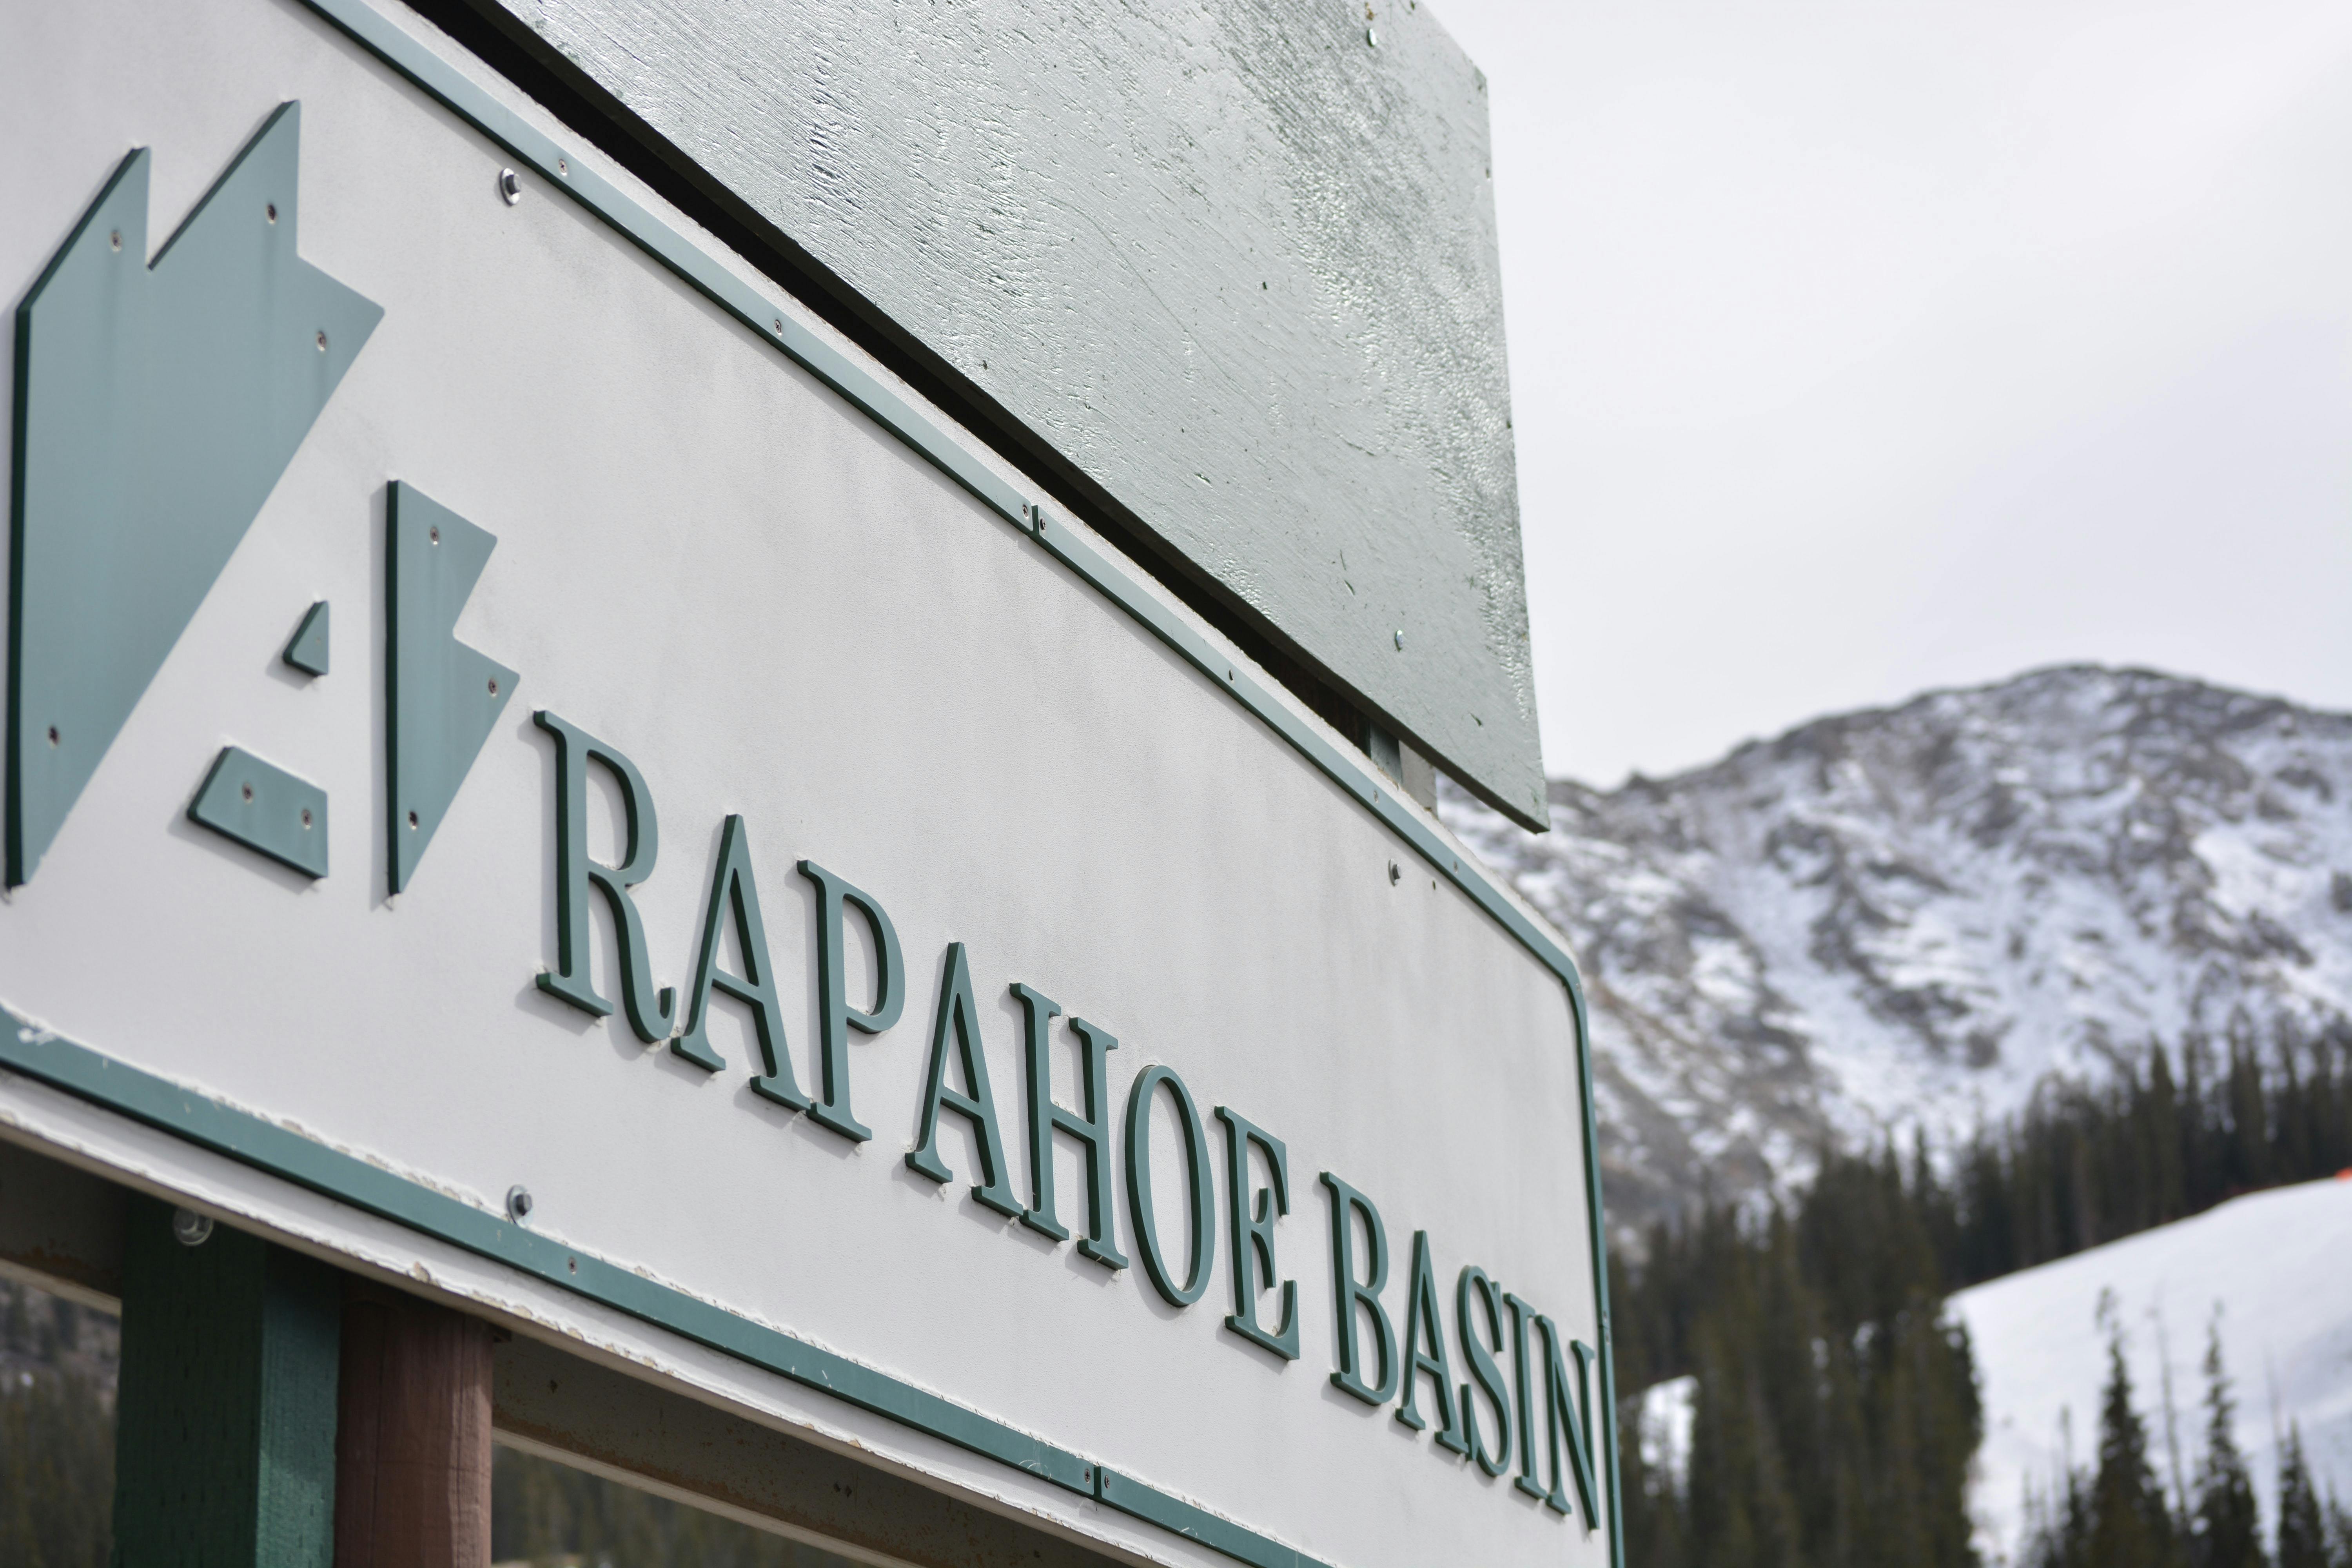 A sign that reads "Arapahoe Basin".